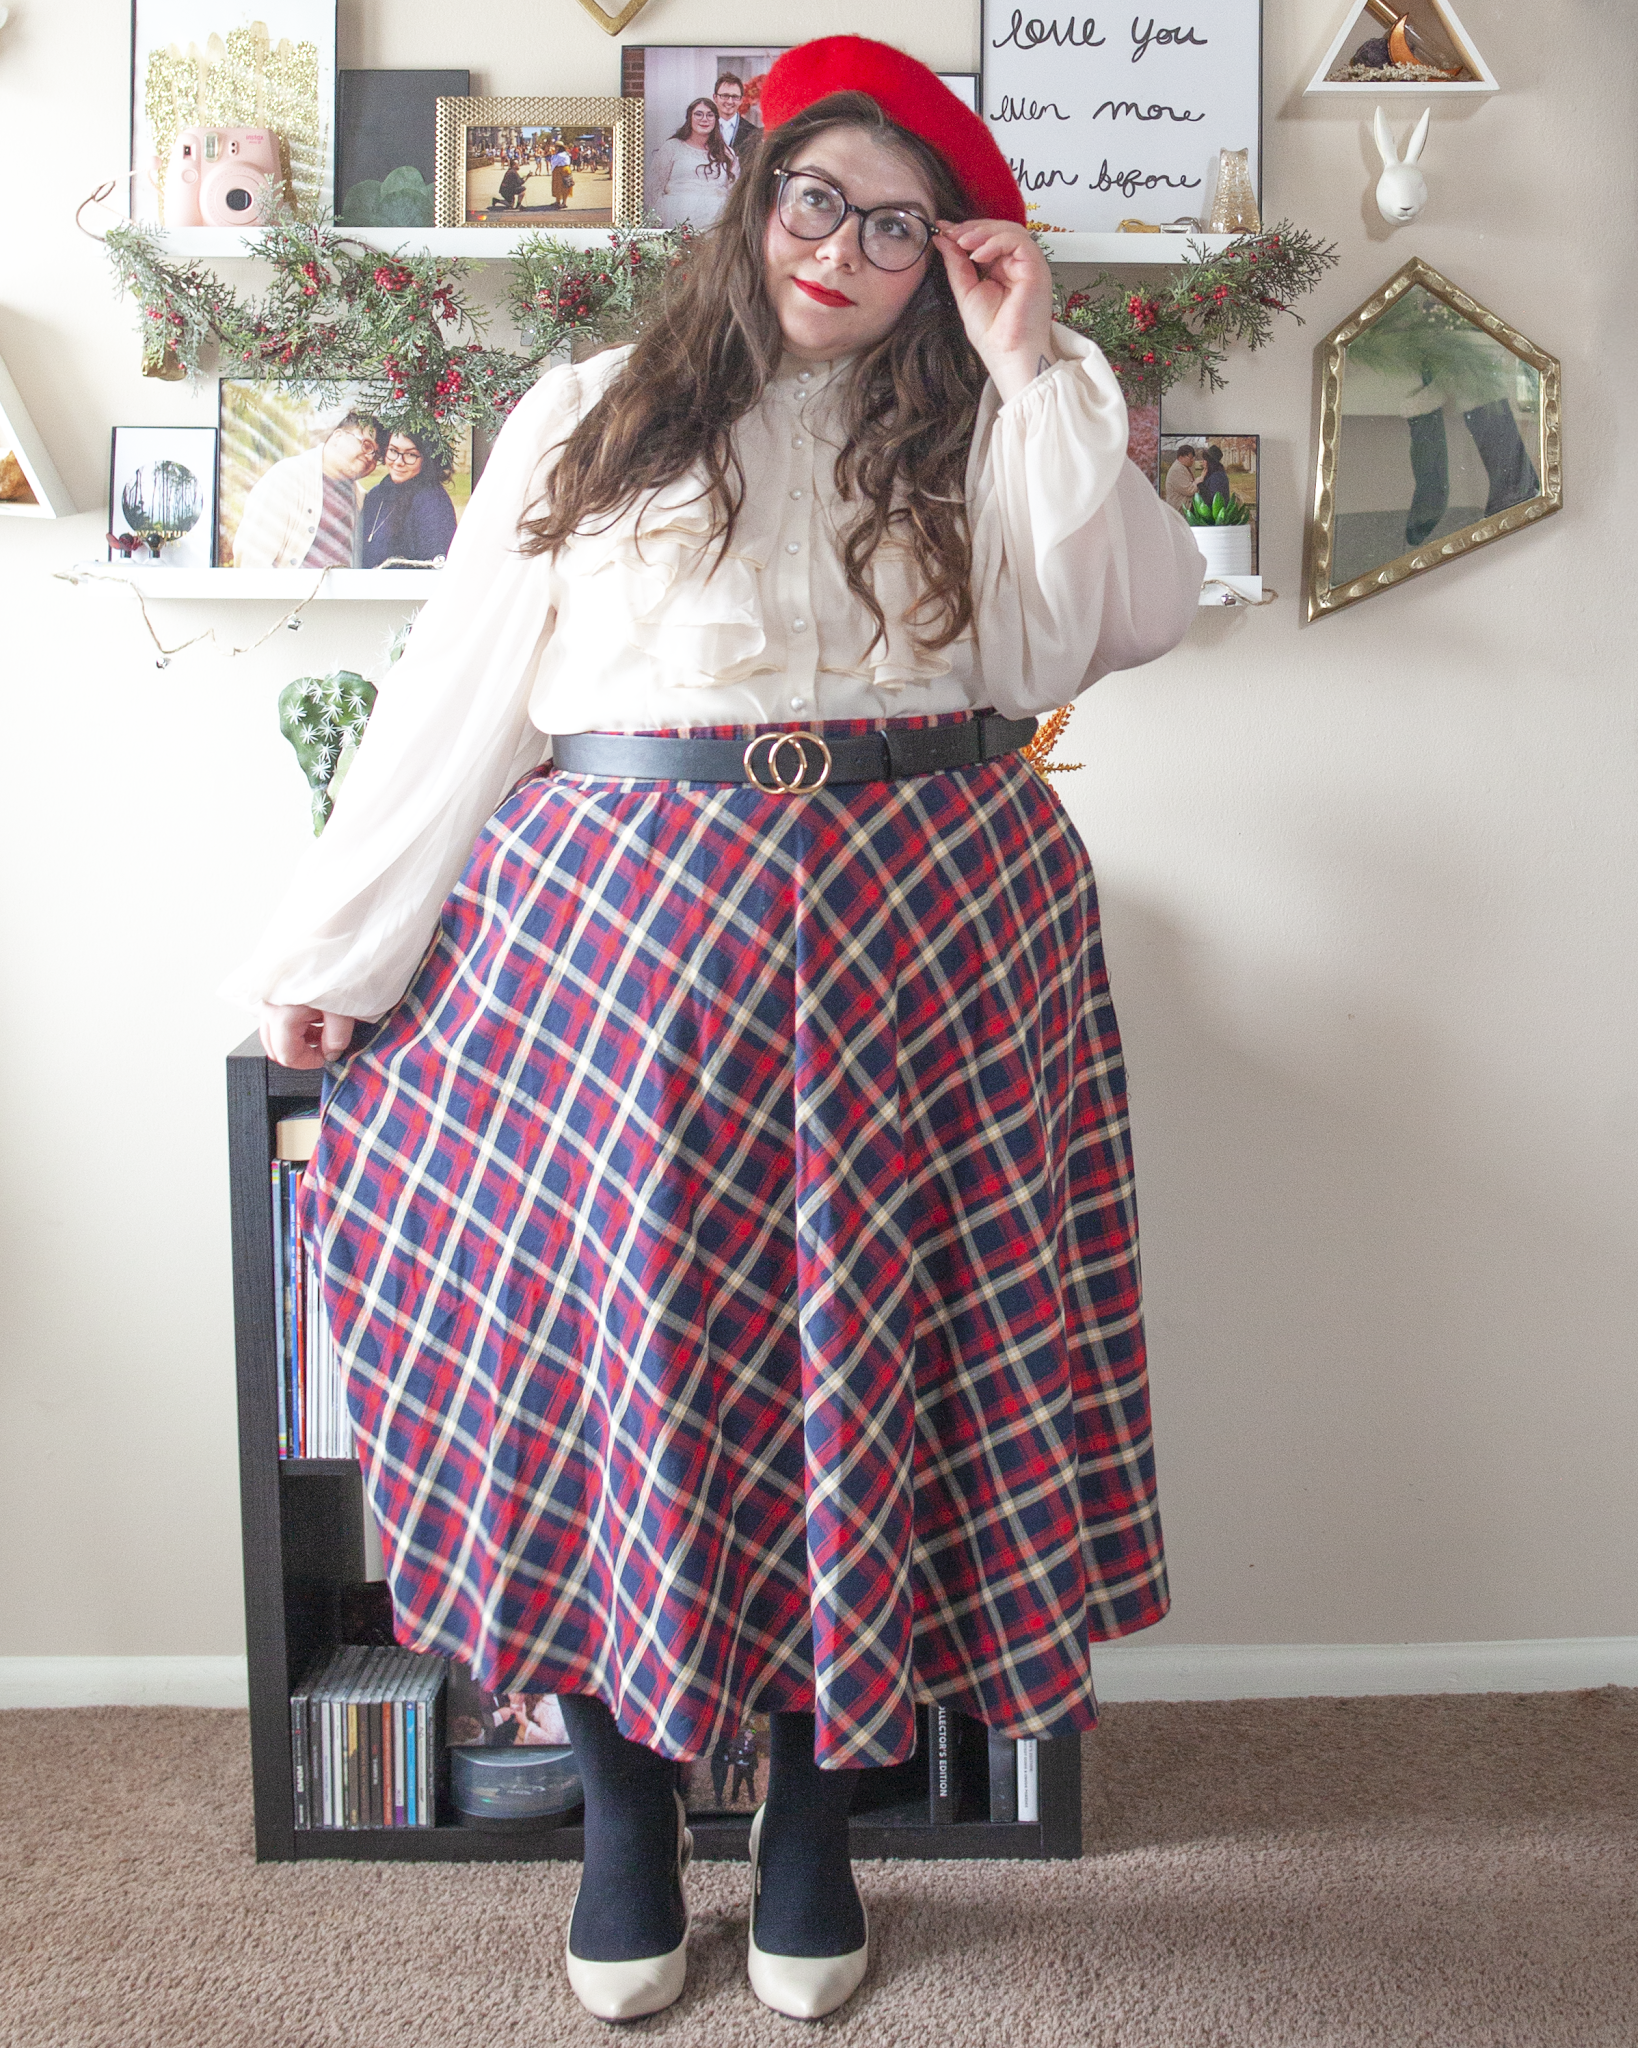 An outfit consisting of a red beret, a cream Regency era inspired high neck button down ruffle bodice blouse with sheer bishop sleeves tucked into a red and blue plaid midi skirt, black tights and cream slingback heels.